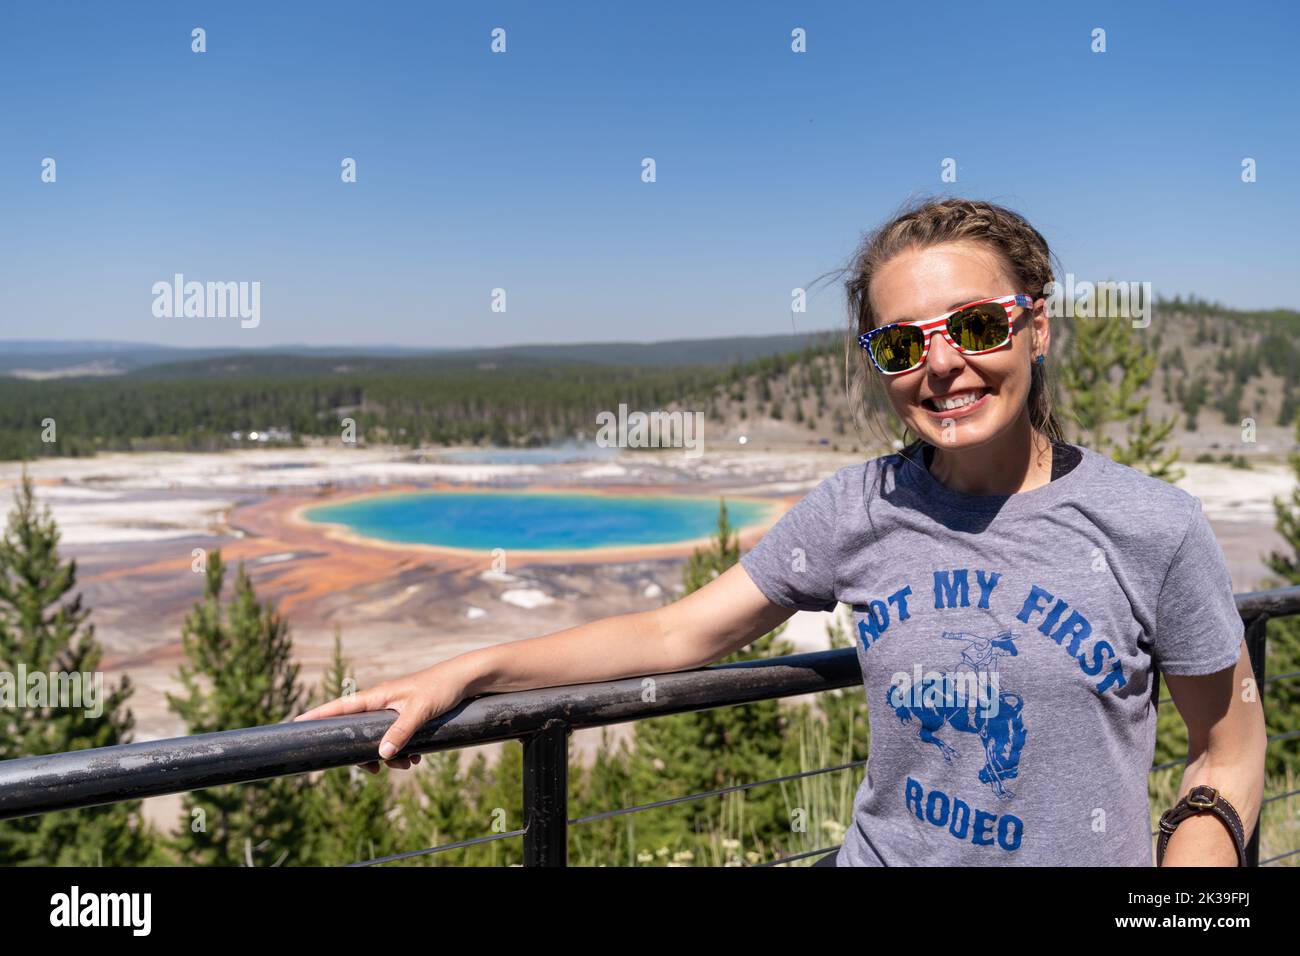 Wyoming, USA - July 19, 2022: Cute woman tourist poses at the overlook for Grand Prismatic Spring in Yellowstone National Park Stock Photo